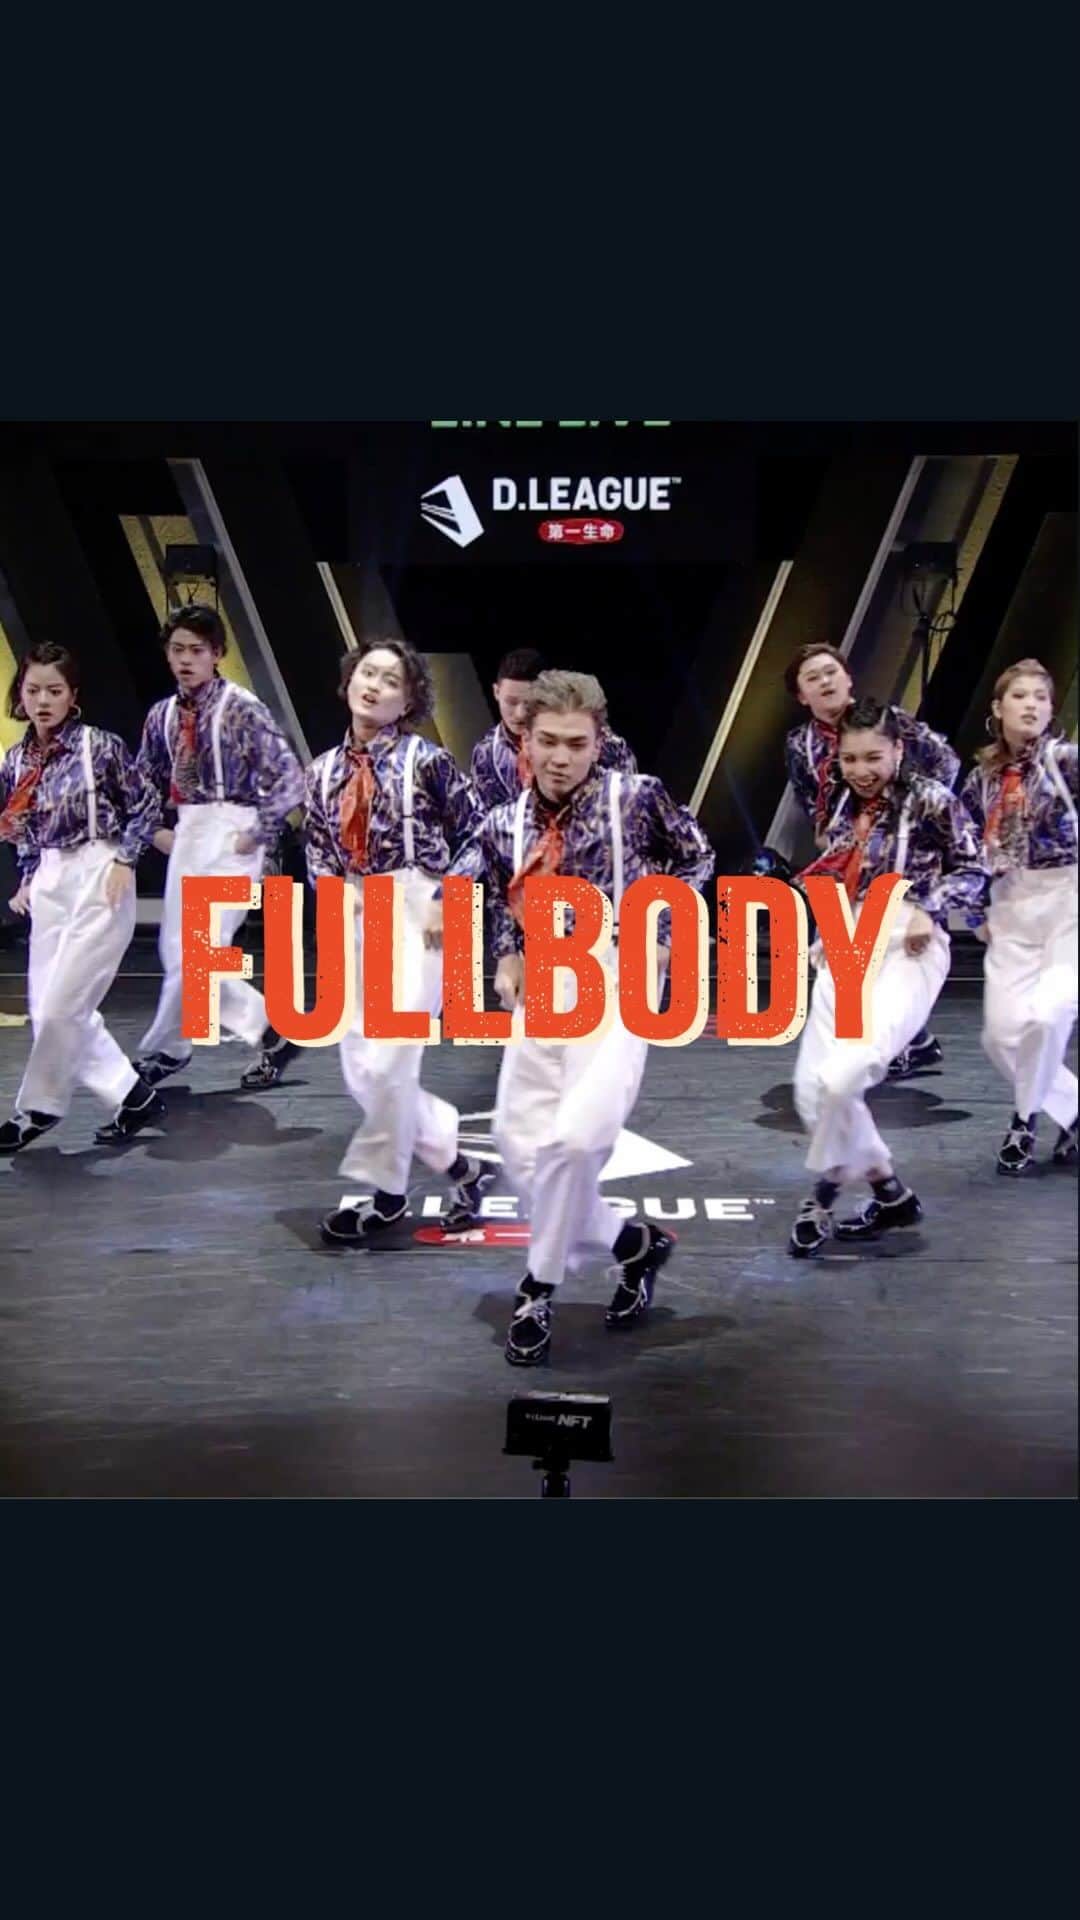 FISHBOYのインスタグラム：「“FULLBODY” by @cyberagentlegit  Directed by me and @cyberagentlegit   Choreo by me and @cyberagentlegit  Music @kyte_xdmns  @fishboydance  For @dleague_official 22-23 season  This piece begins with a declaration of intent to "express oneself through the whole body." And so, the work starts with "Head, Shoulders, Knees & Toes," a song that everyone must have sung as a child. As the piece is titled "Whole Body," we incorporated a rich variety of dance styles and variations that showcase the unique qualities of the team. The composition was designed to allow each member to shine individually. It is a well-regarded and energetic piece, which had the opportunity to be showcased in a pre-FIFA WORLD CUP special program broadcasted in Japan. It holds a lot of sentimental value to us.  link in bio.  全身で表現する！という意思表示から始まる作品。 クリエイティブに関しても、”Legitの全身で”ということで全メンバーが振り付けを担当。それぞれの出番でそれぞれがバチっと決めていきます。メンバーの全員の良さが非常に出た作品だと思っています。故に、B.LEAGUEでのハーフタイムショーやサッカーWORLD CUP直前特番などでも披露する機会に恵まれました。  白ハットを用意したのですが、使い所が難しく断念…と思いきや、前日に @ena_lock がハットを使った方が良い！と勇気を持っていってくれたおかげで作品にメリハリが生まれました。  クリエイティブにどんどん意見を言っていく姿勢、そう言った意味でも私の中ではLegitの転換点の１つとも捉えられる思い出の作品です。  全編はプロフィールから！」